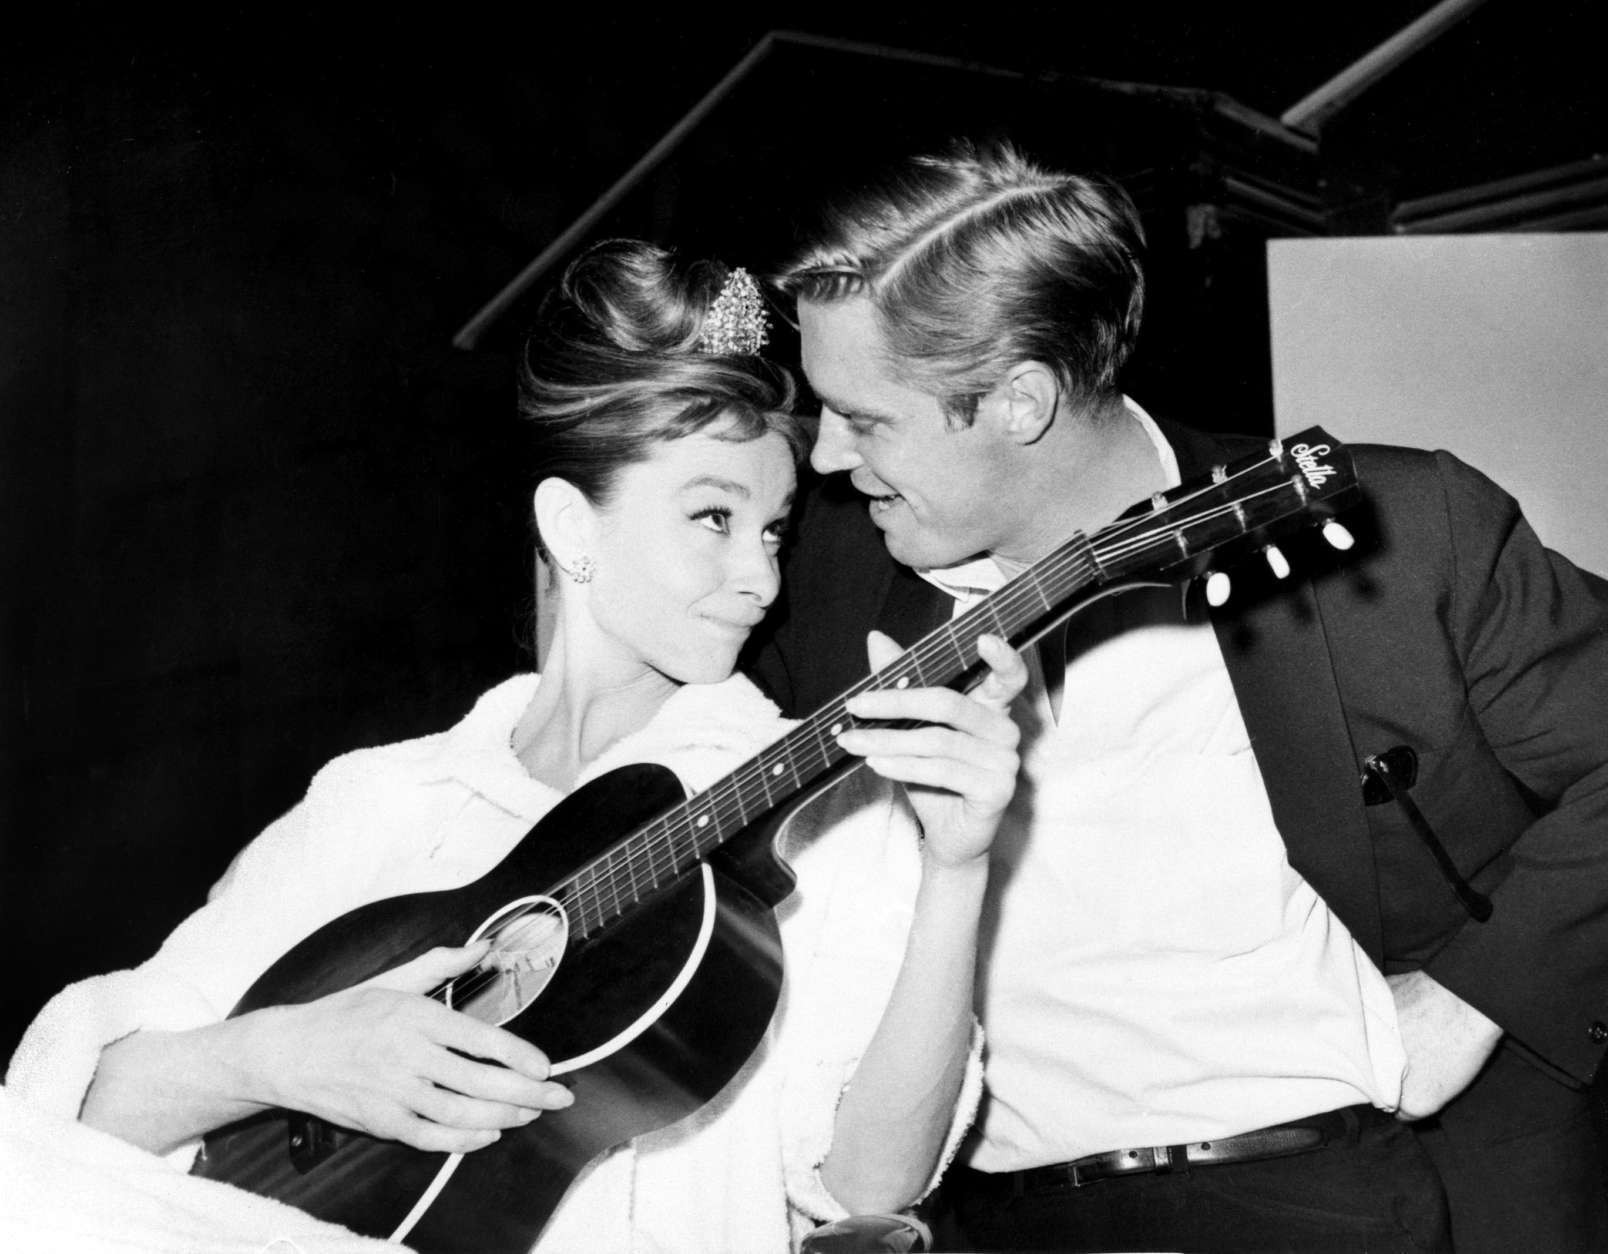 British actress Audrey Hepburn strums a guitar with her co star George Pappard between takes on the set of "Breakfast in Tiffany's" at a film studio in Hollywood on Dec. 7, 1960. (AP Photo)